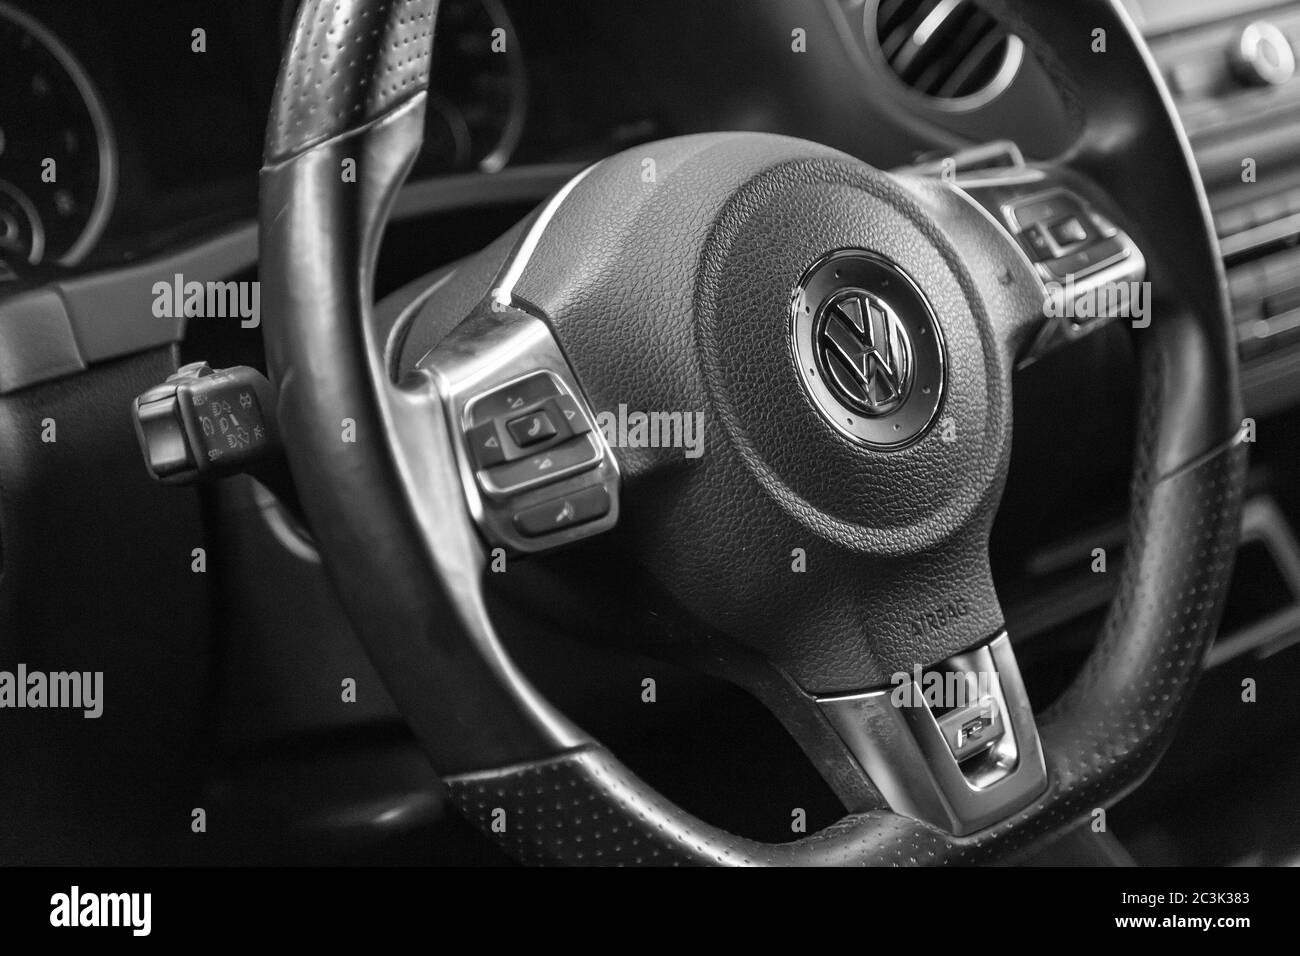 Moscow. November 2018. Multifunctional steering wheel Volkswagen. R-line. Leather. With paddle shifters and buttons to control the cruise control, music, phone. Stock Photo